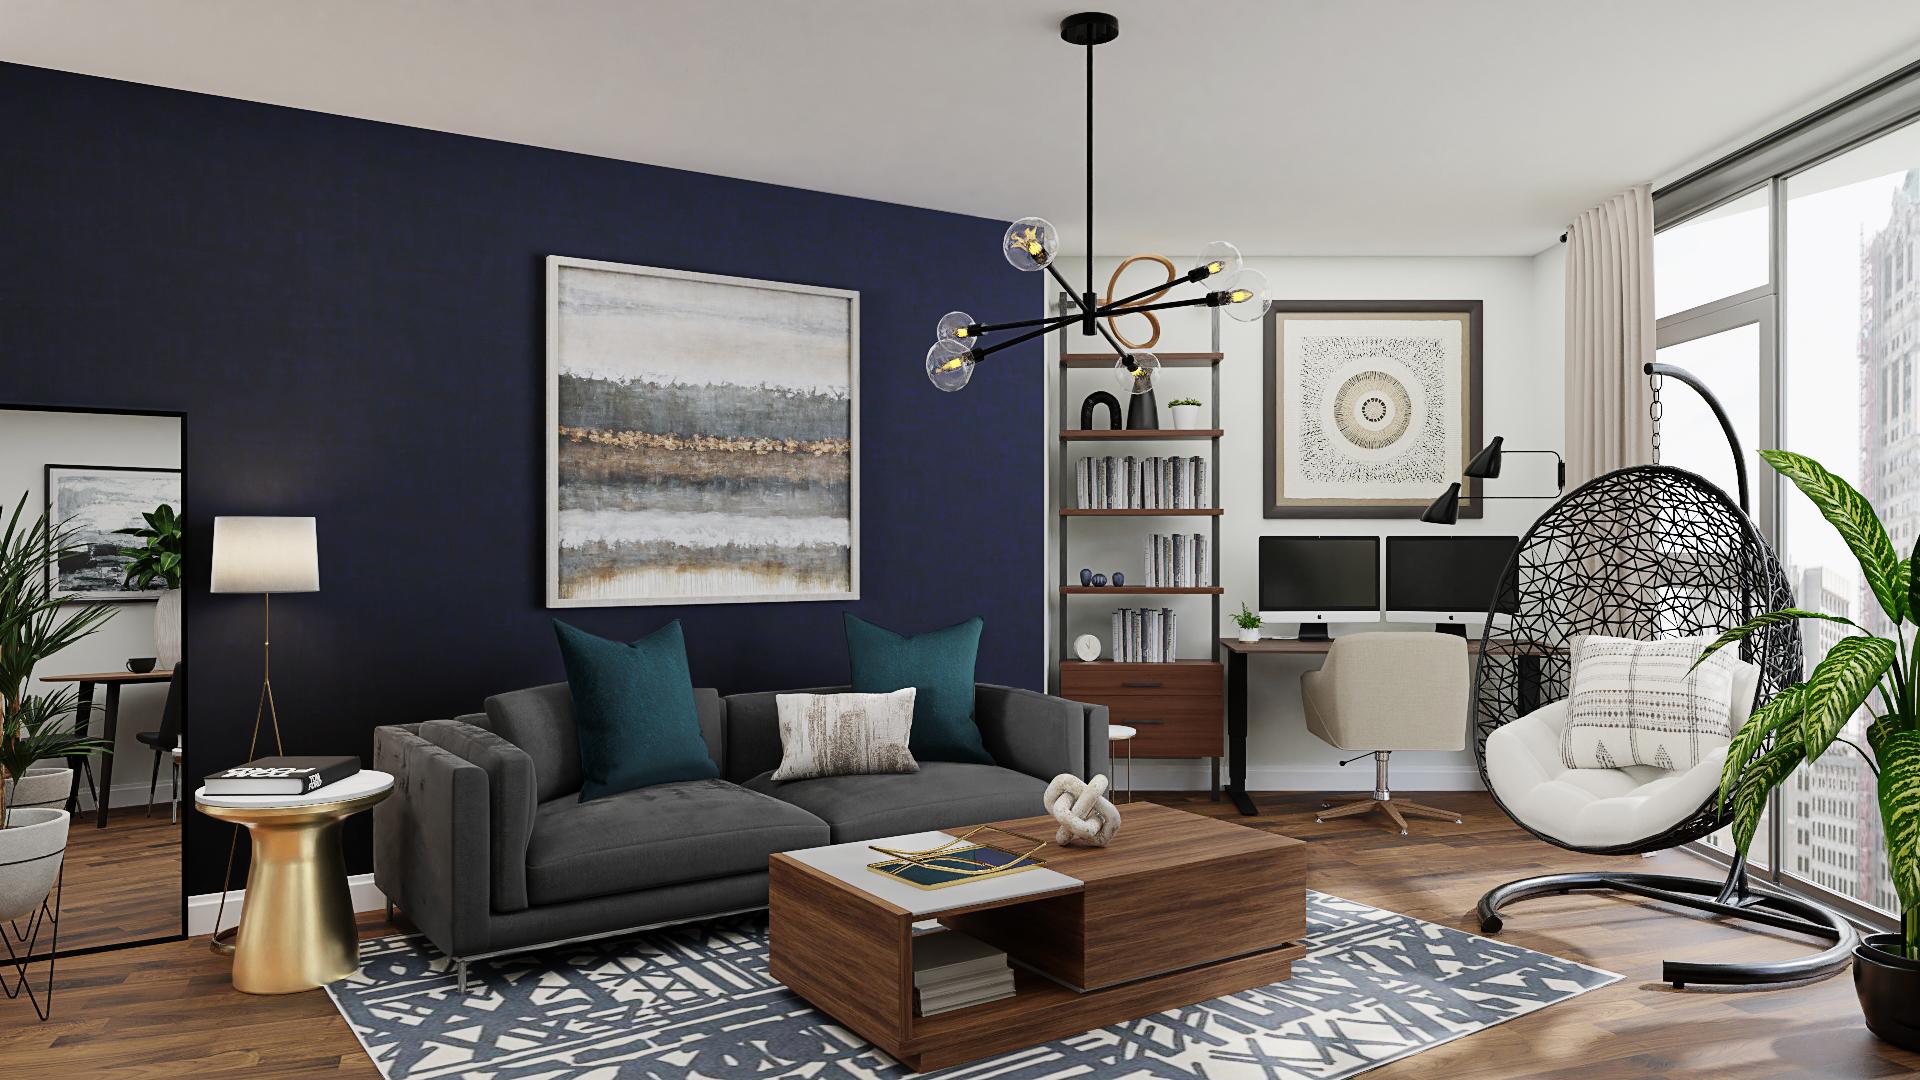 A Glam Living Room With Industrial Accents